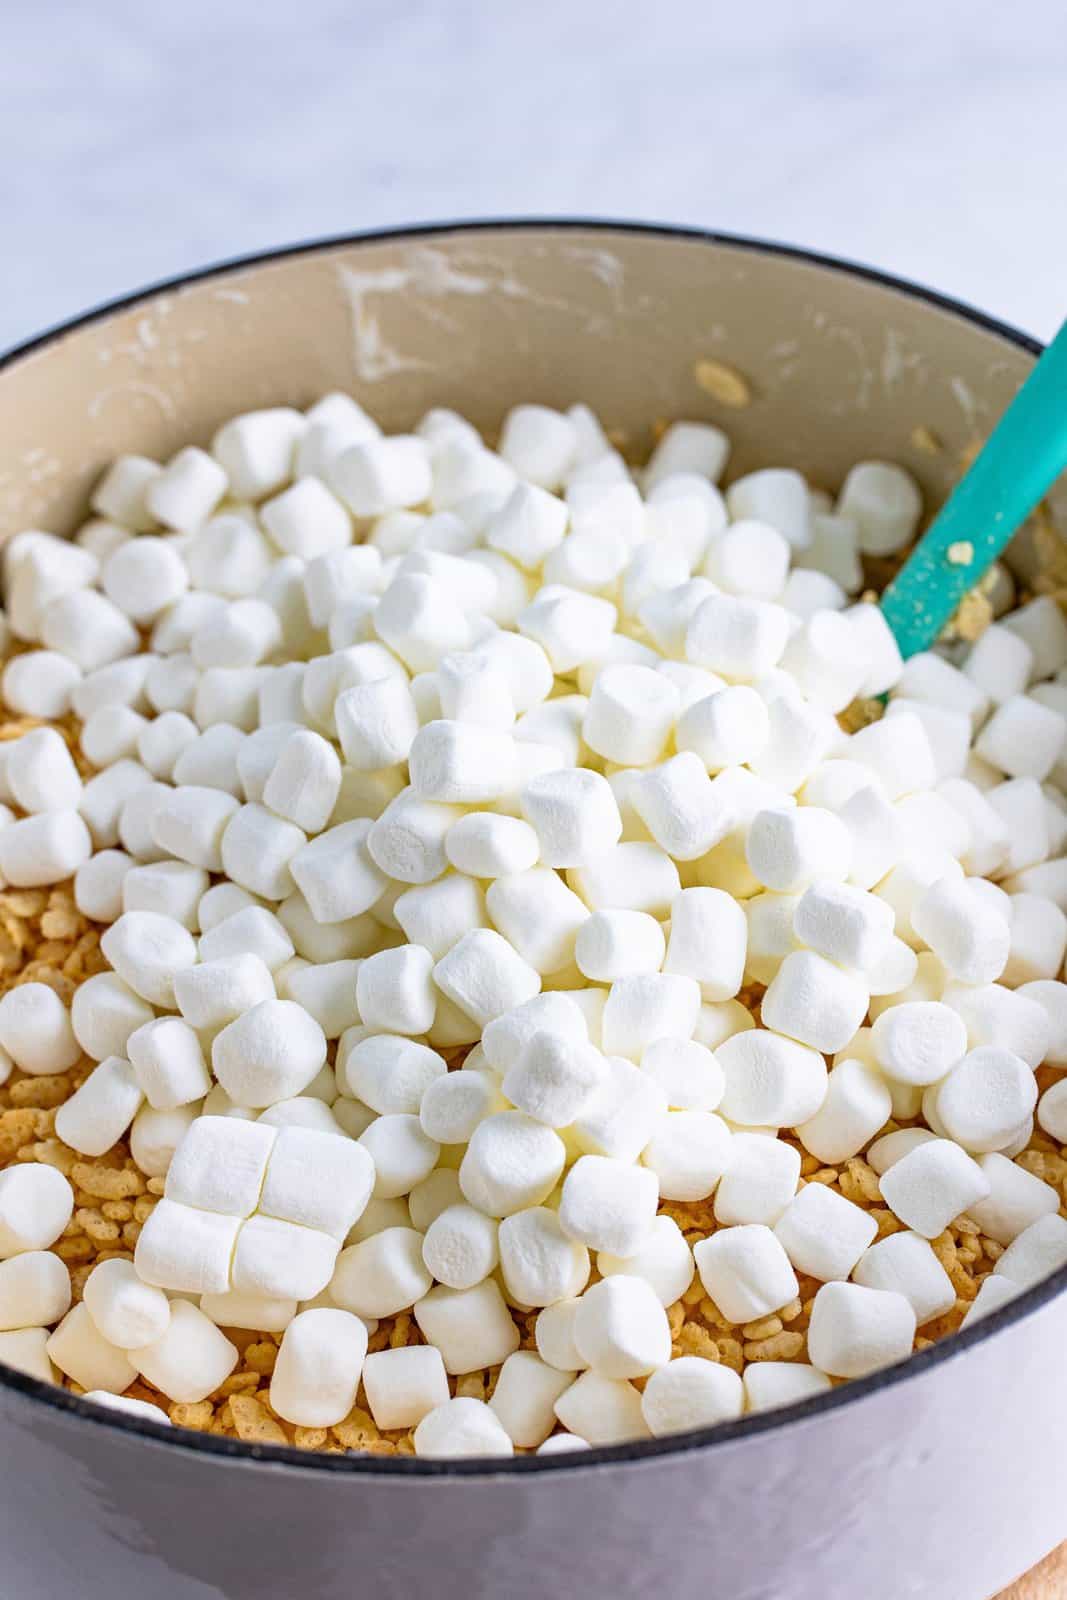 Mini marshmallows on top of cereal and melted marshmallow mixture.